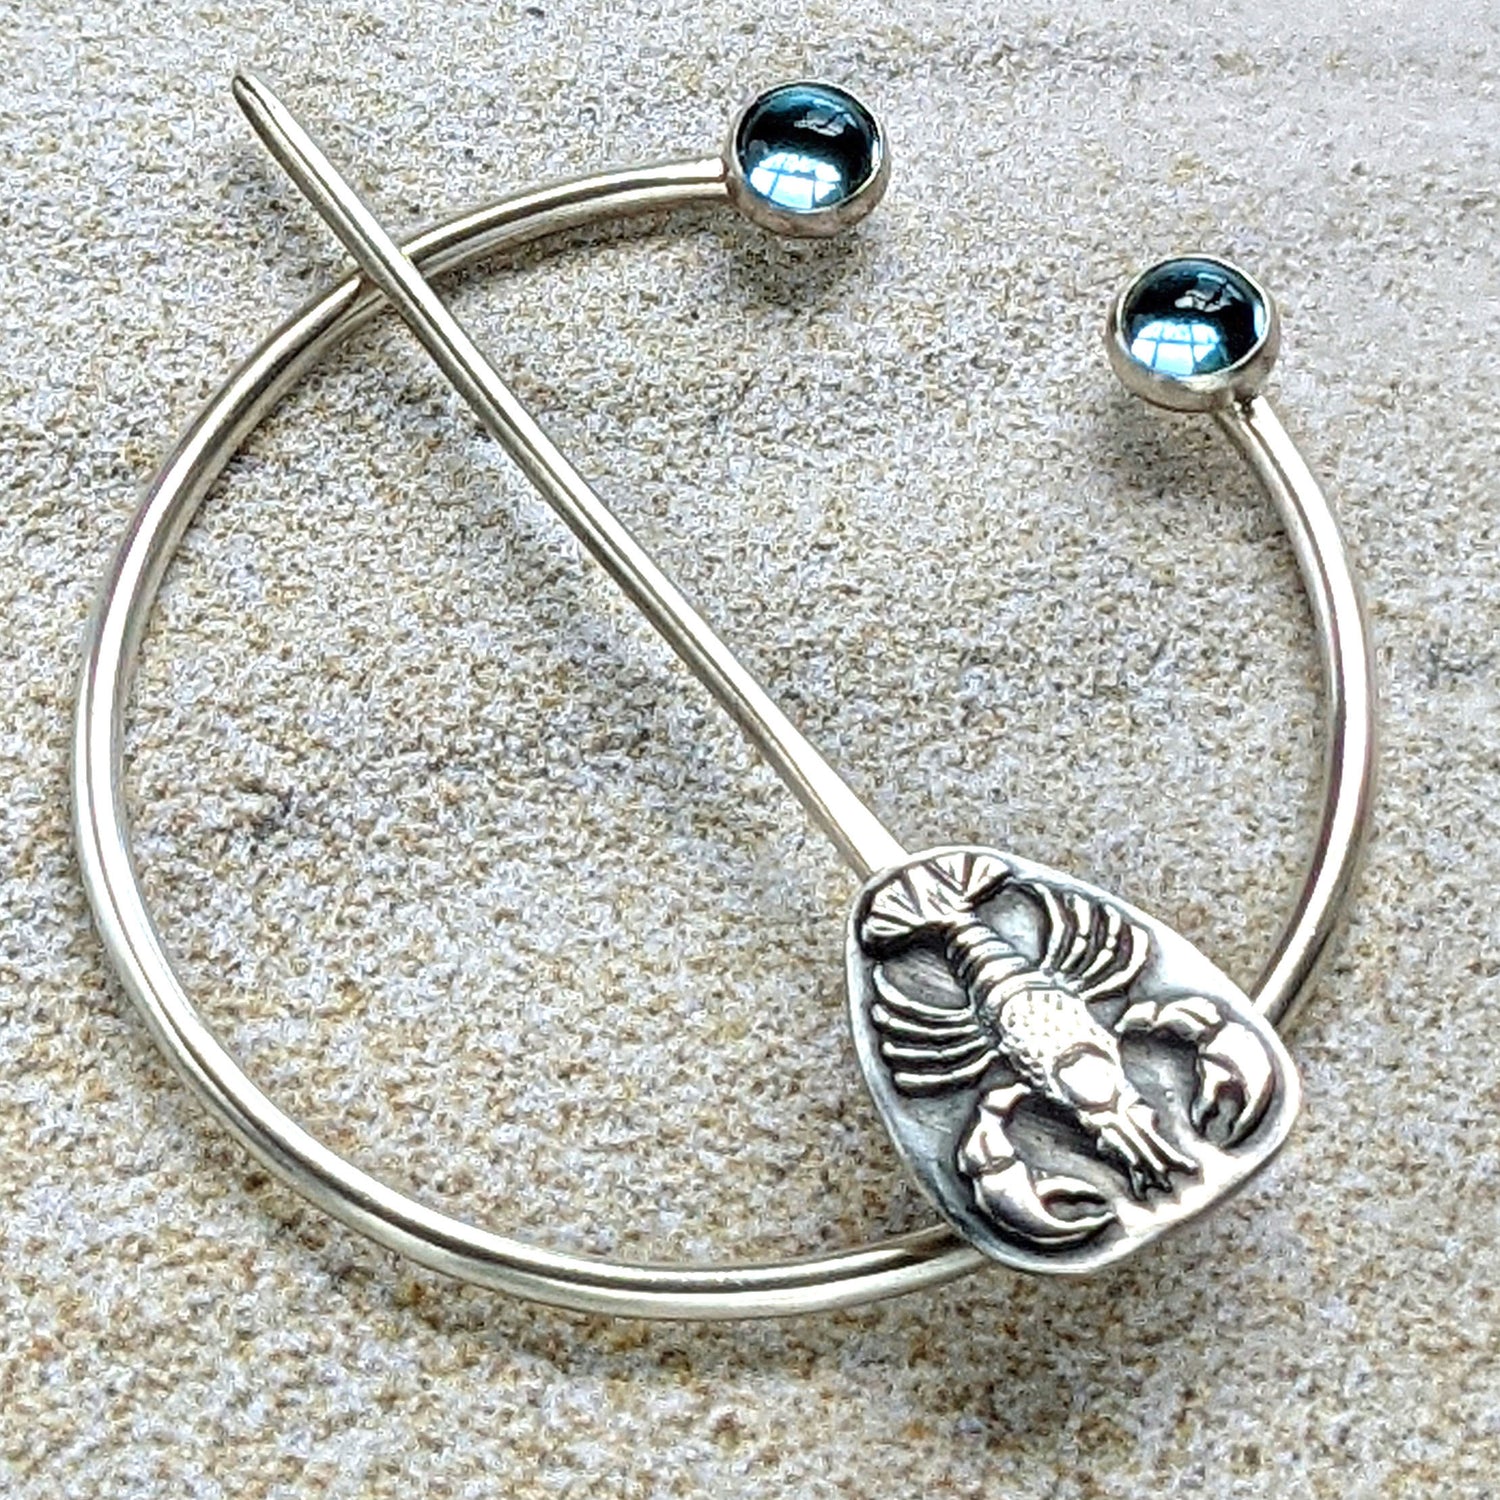 Sterling silver penannular brooch. The tip of the stem is decorated with a detailed dimensional lobster, and the ends of the loop have bright swiss blue topaz gemstone cabochons.